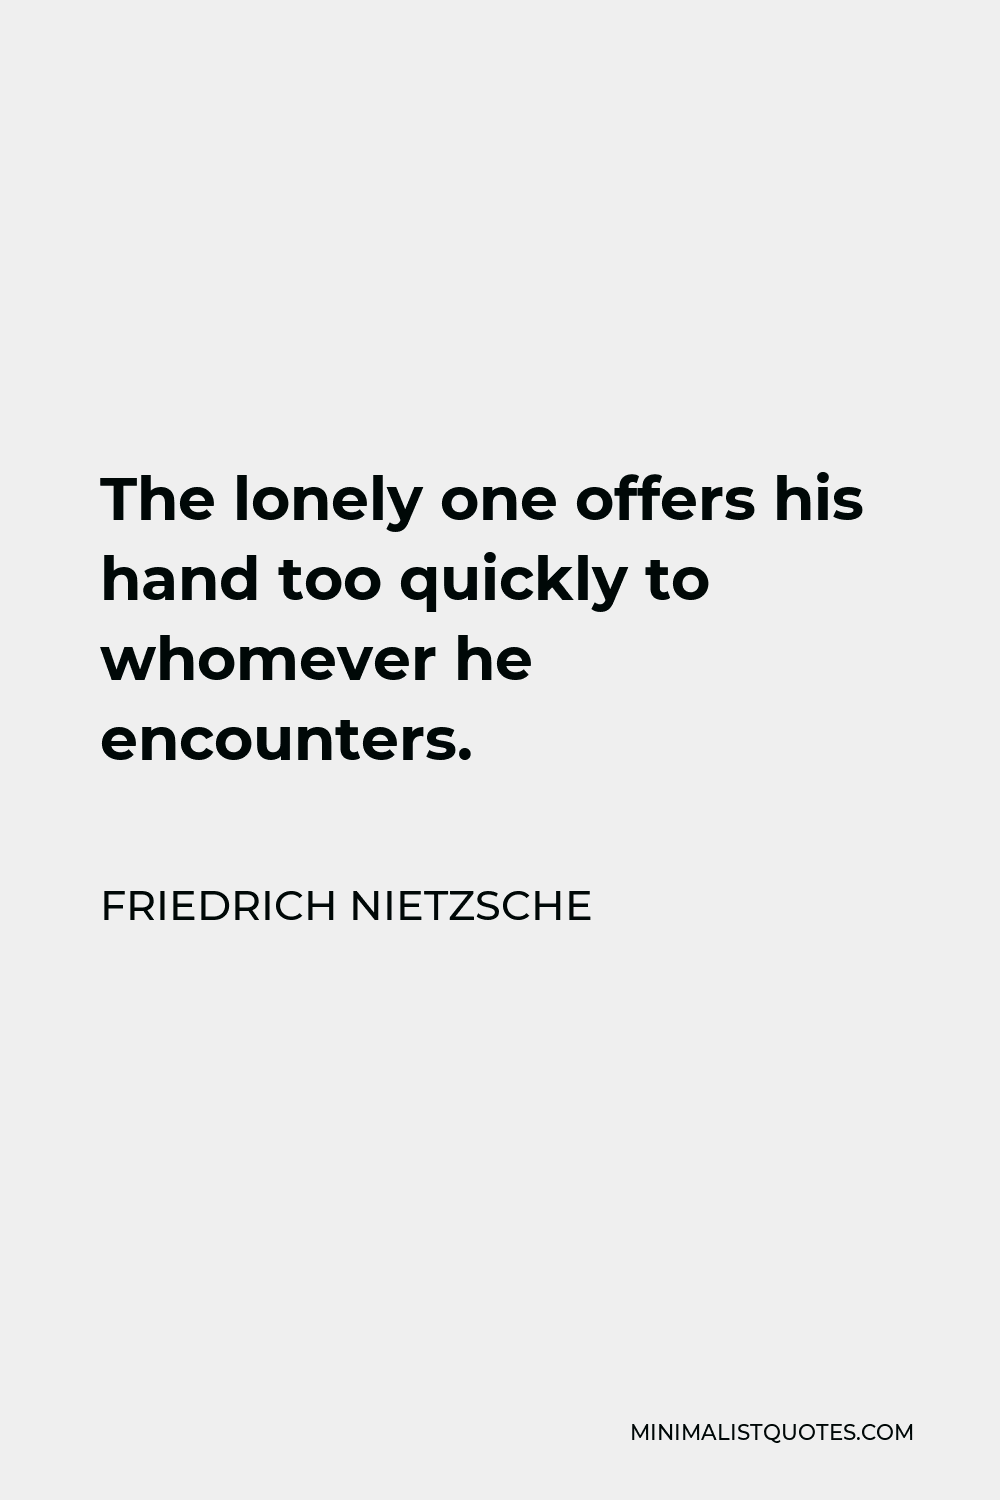 Friedrich Nietzsche Quote - The lonely one offers his hand too quickly to whomever he encounters.